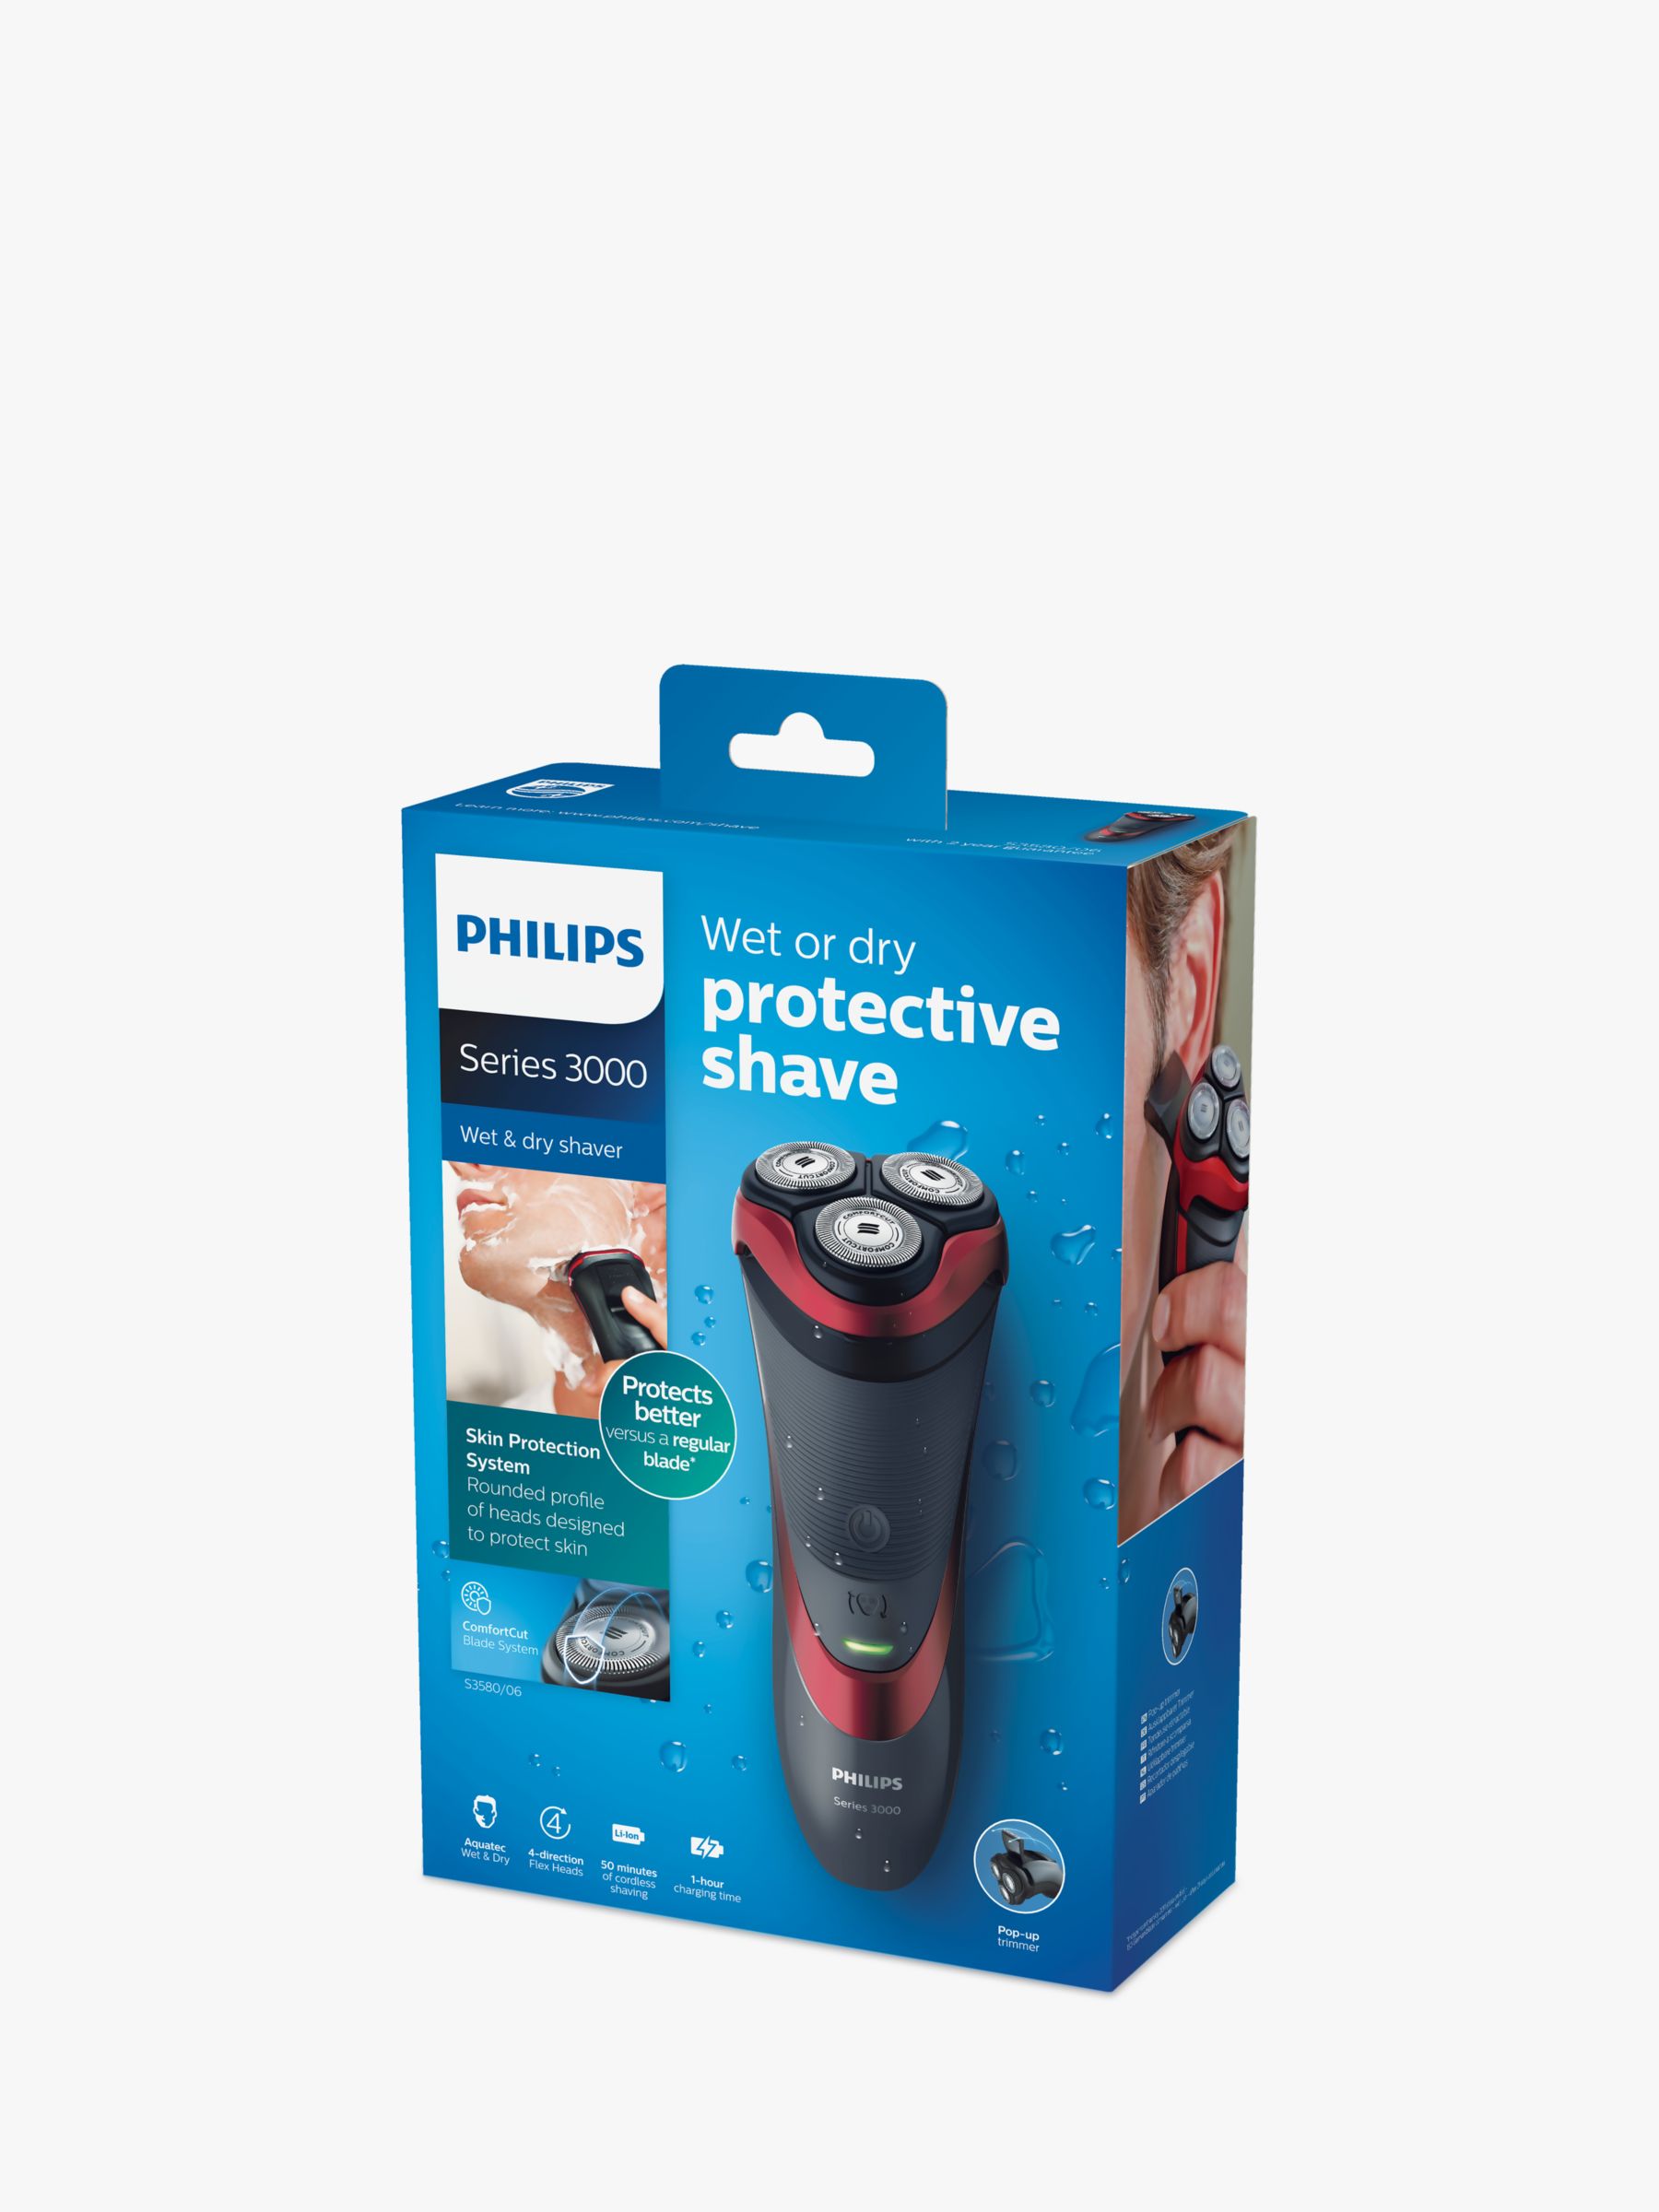 philips shaver series 3000 shaver s3580